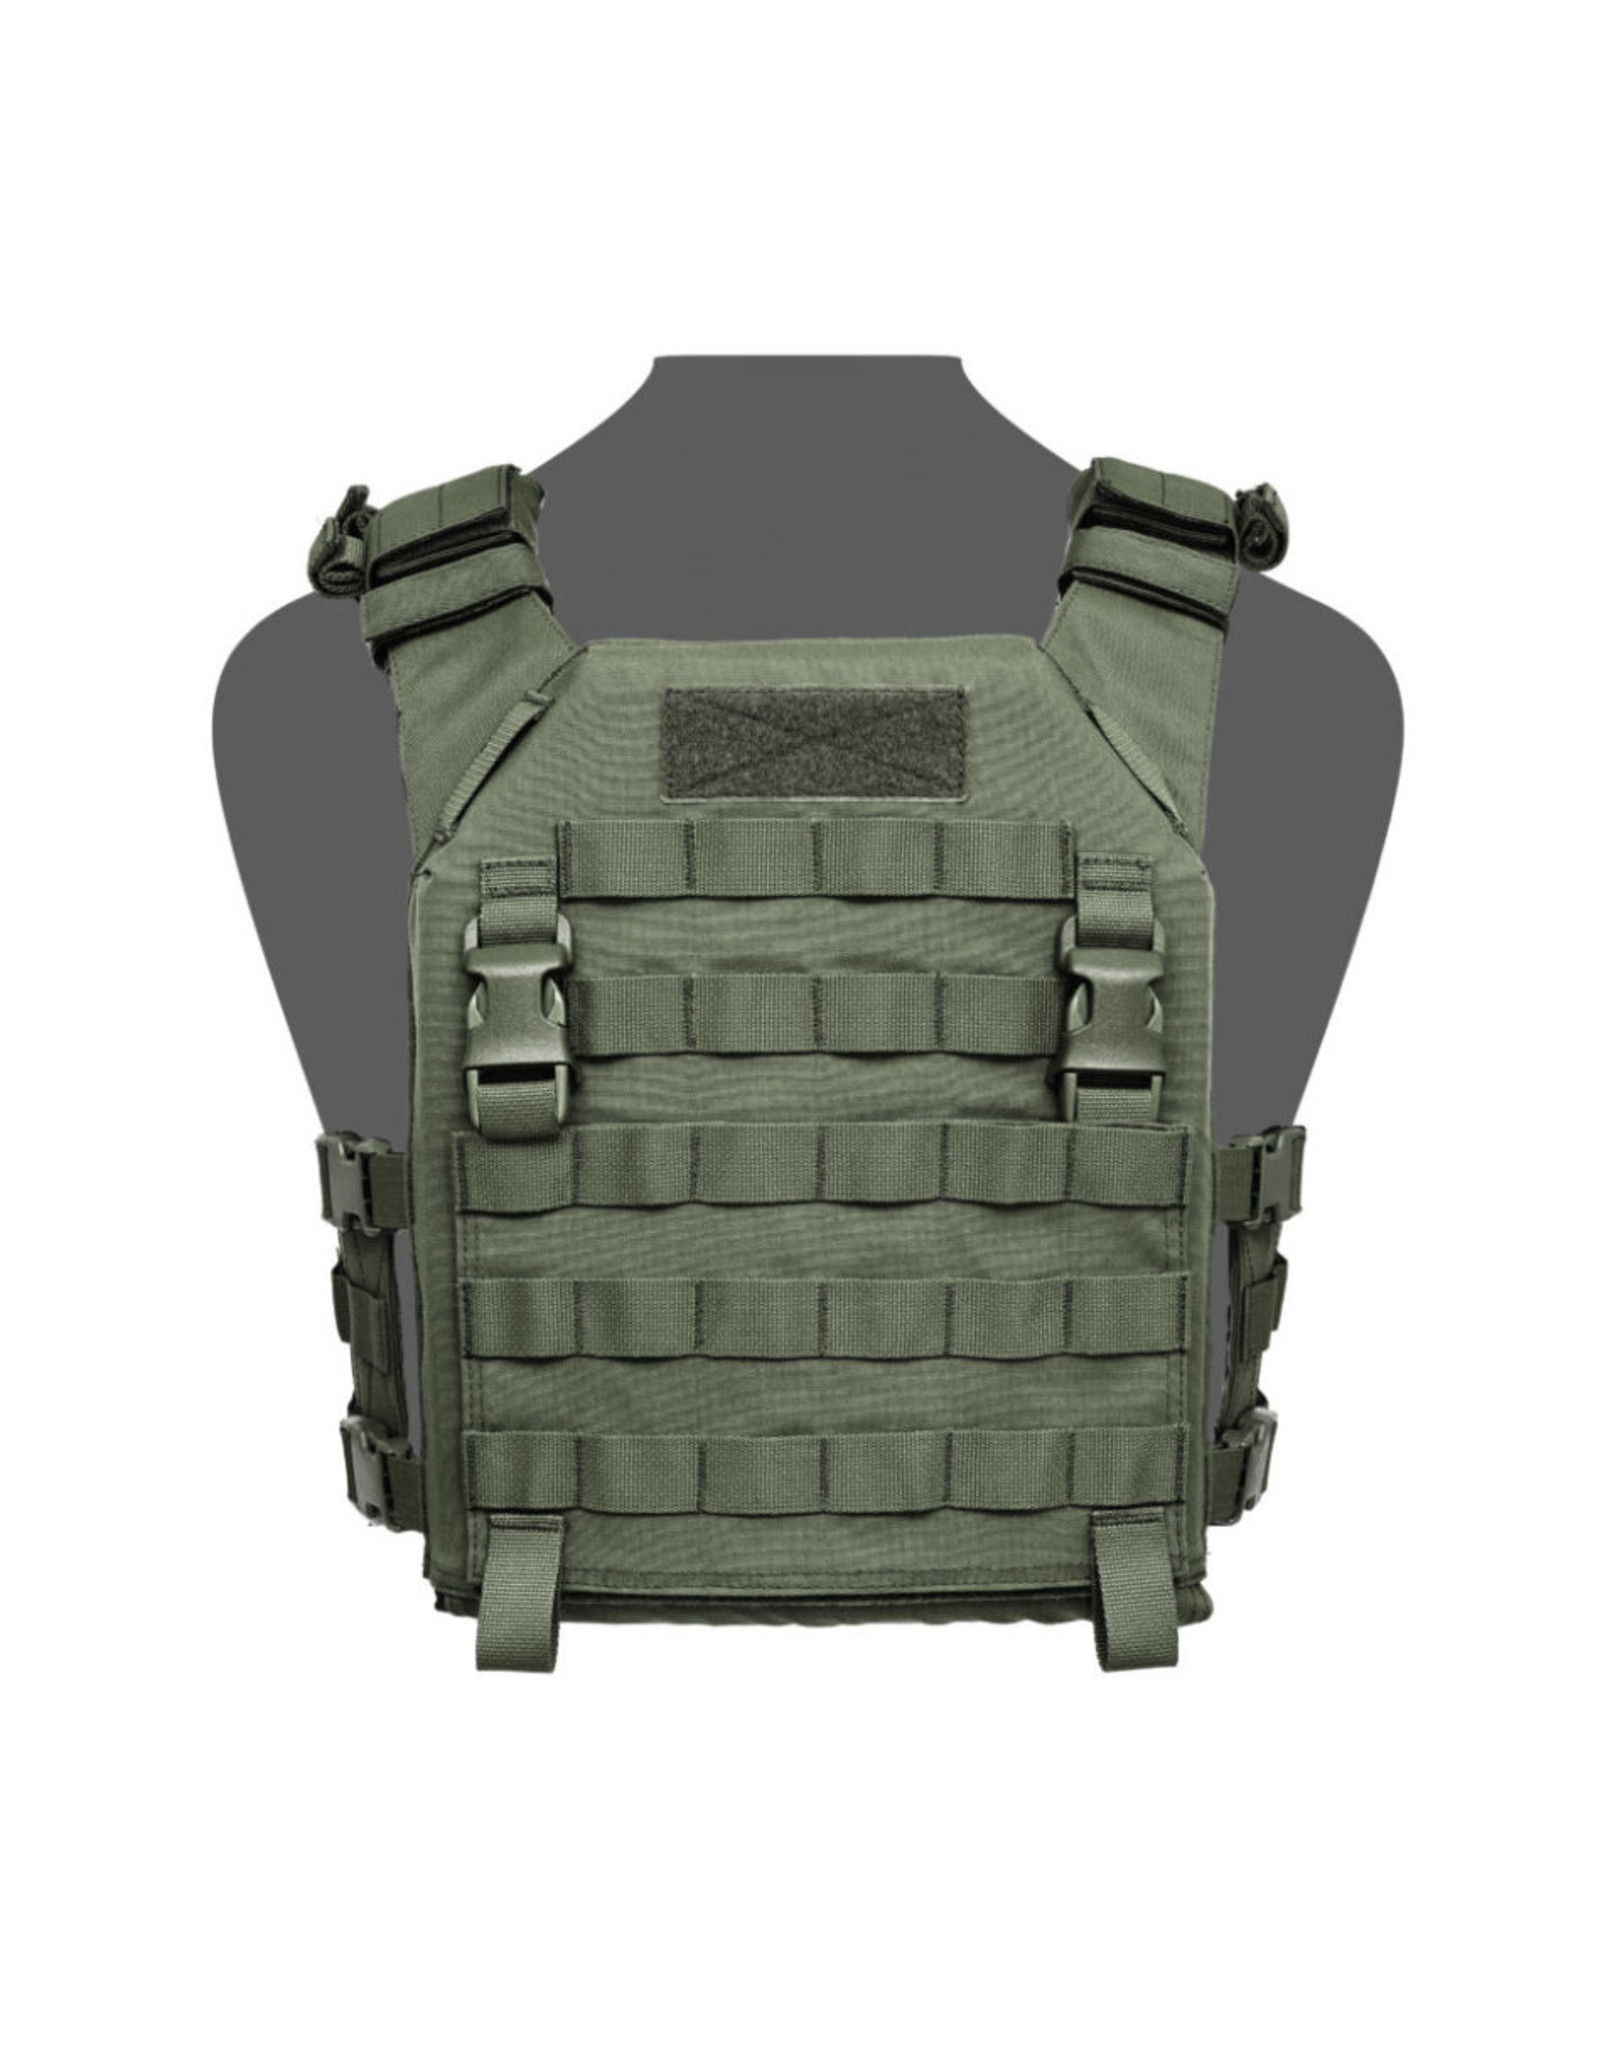 Warrior Recon Plate Carrier SAPI - Olive Drab